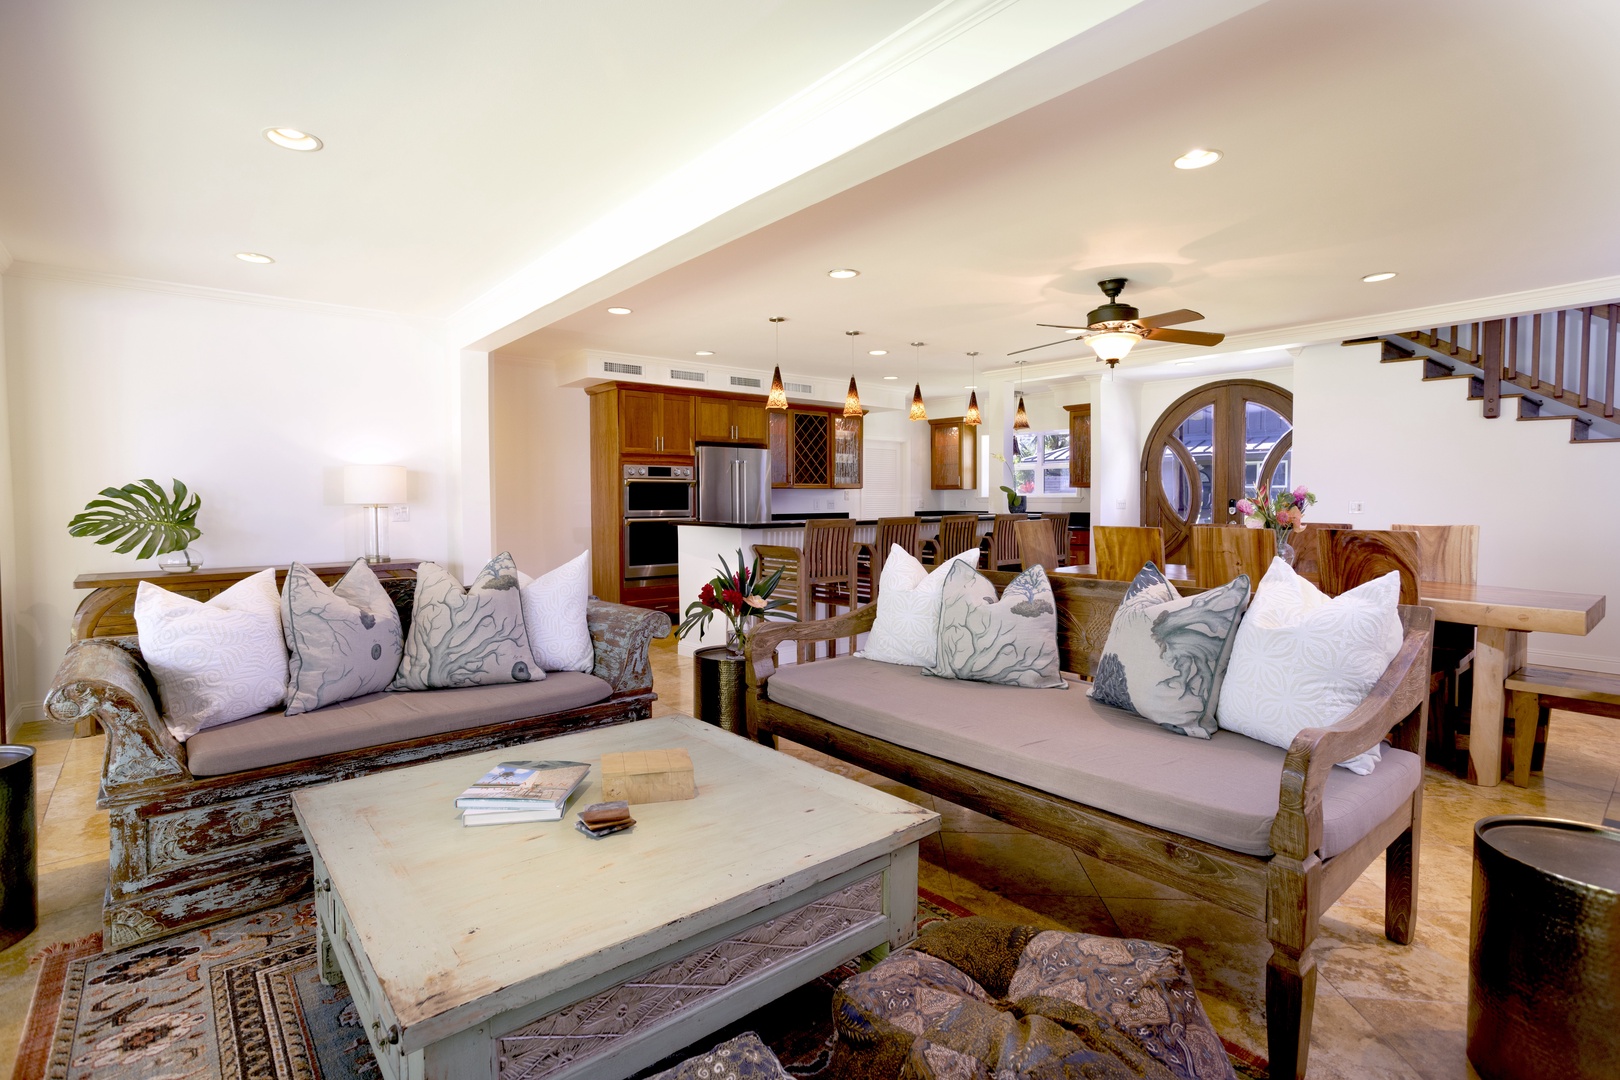 Kailua Vacation Rentals, Mokulua Seaside - Open-concept floorplan for a seamless flow and connection